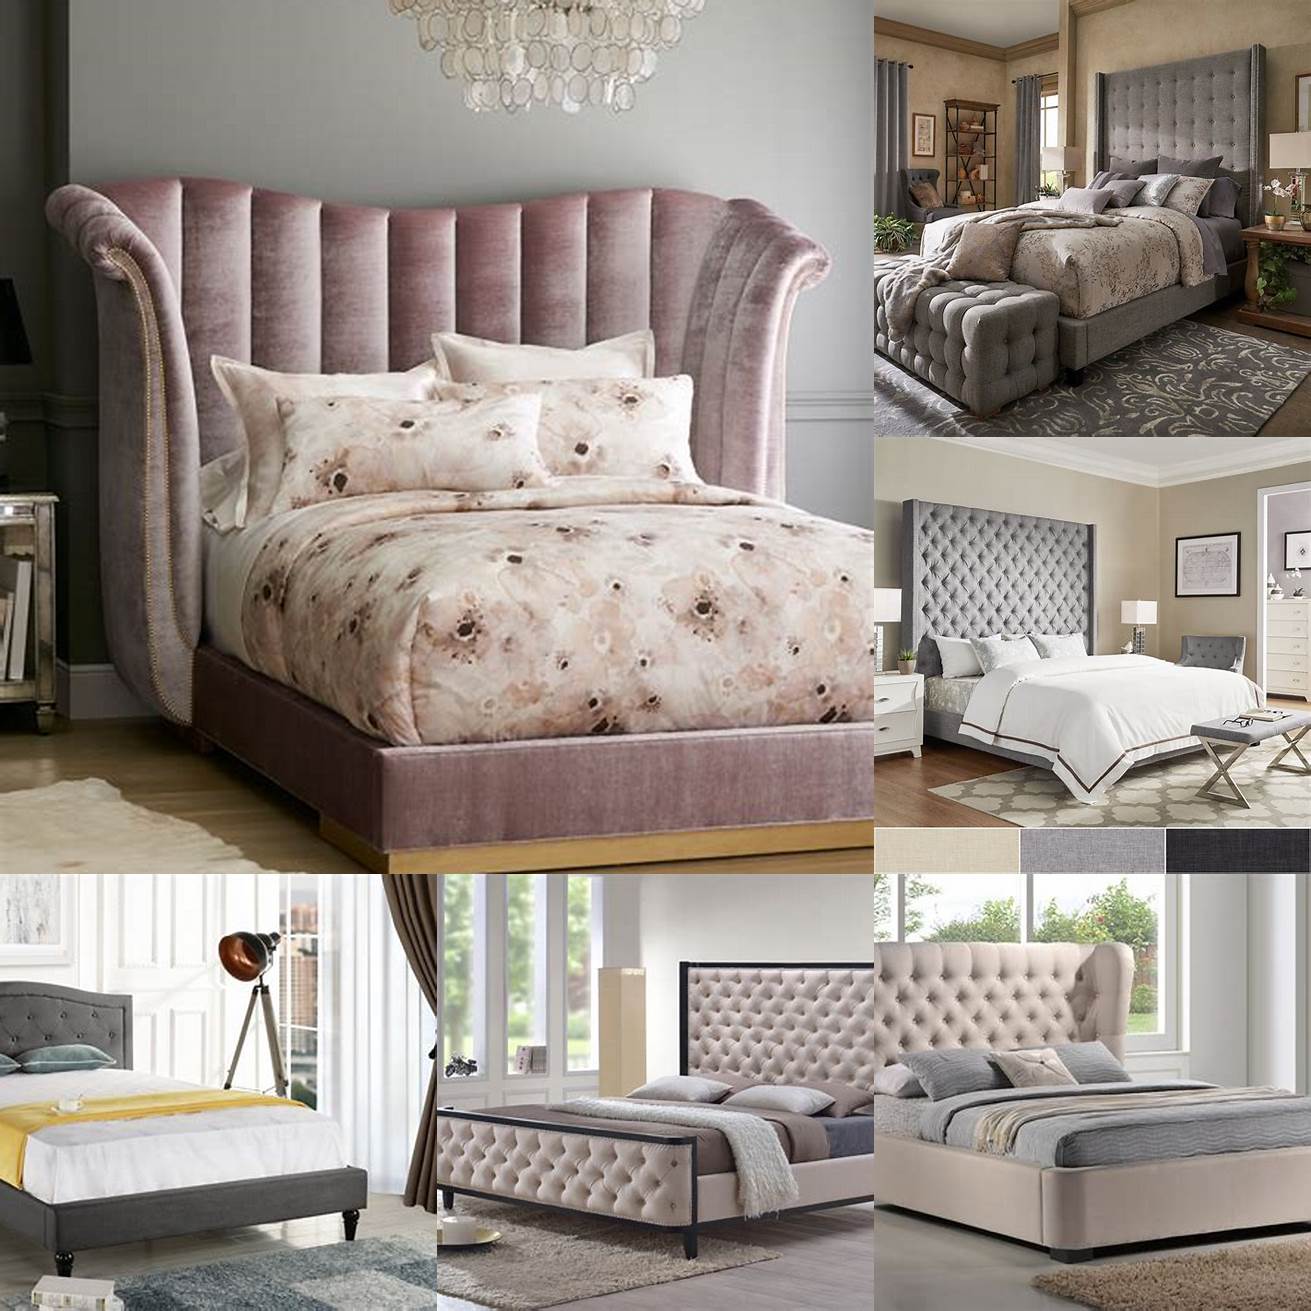 Durability Tufted beds are made of high-quality materials that are built to last The upholstery is usually stain-resistant and easy to clean which means that your bed will look as good as new for many years